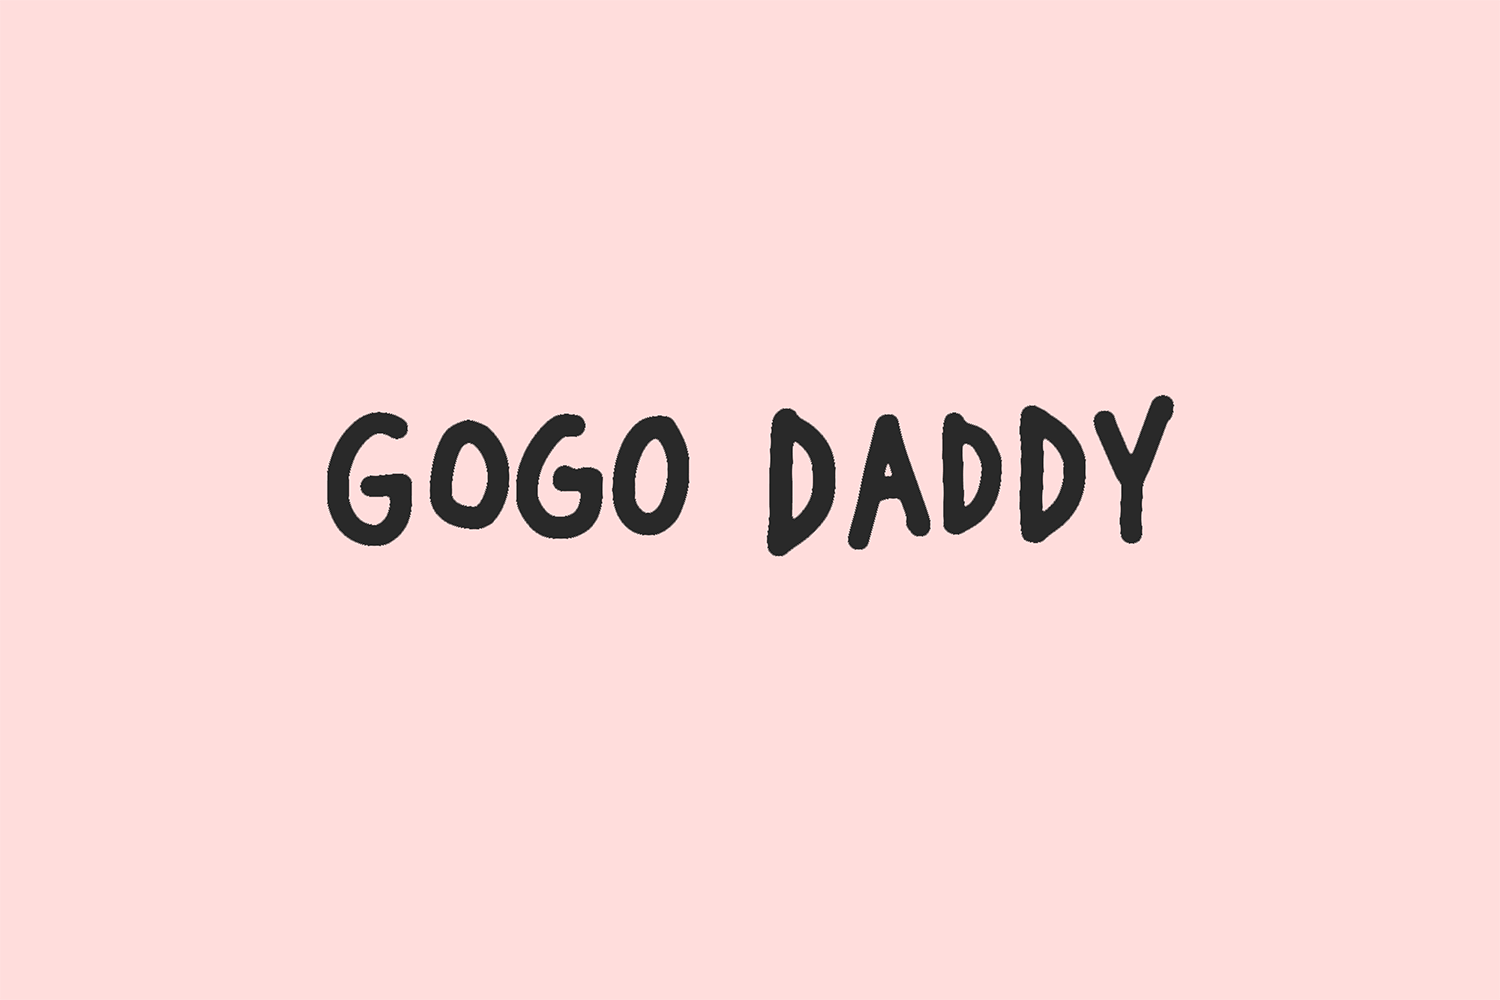 Logotype designed by Studio South and illustrator Egle Zvirblyte for Auckland based Thai canteen Gogo Daddy